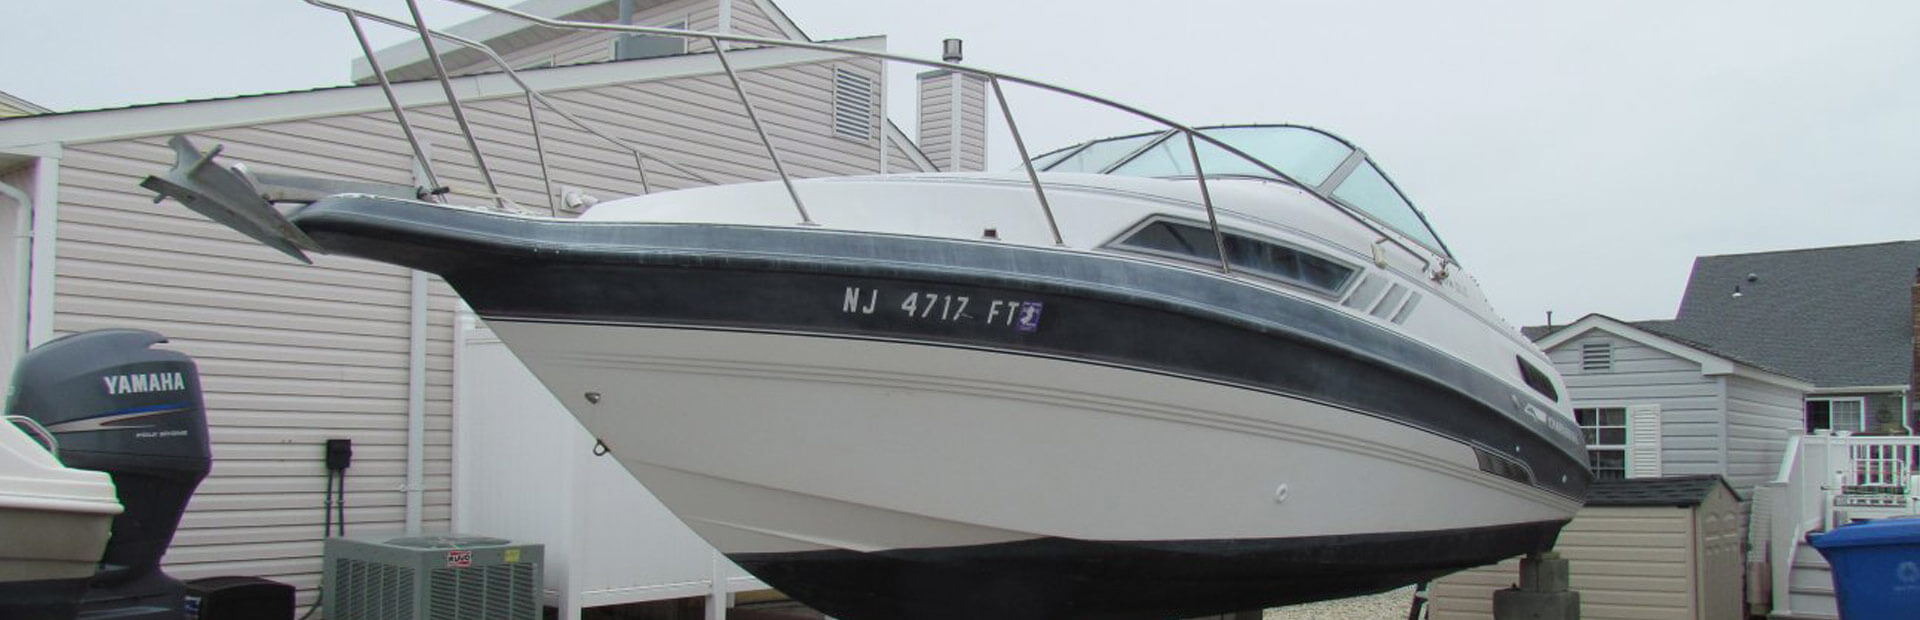 Donate Boat, Yacht or Jet Ski in New Hampshire - Sailboat Donations Too!